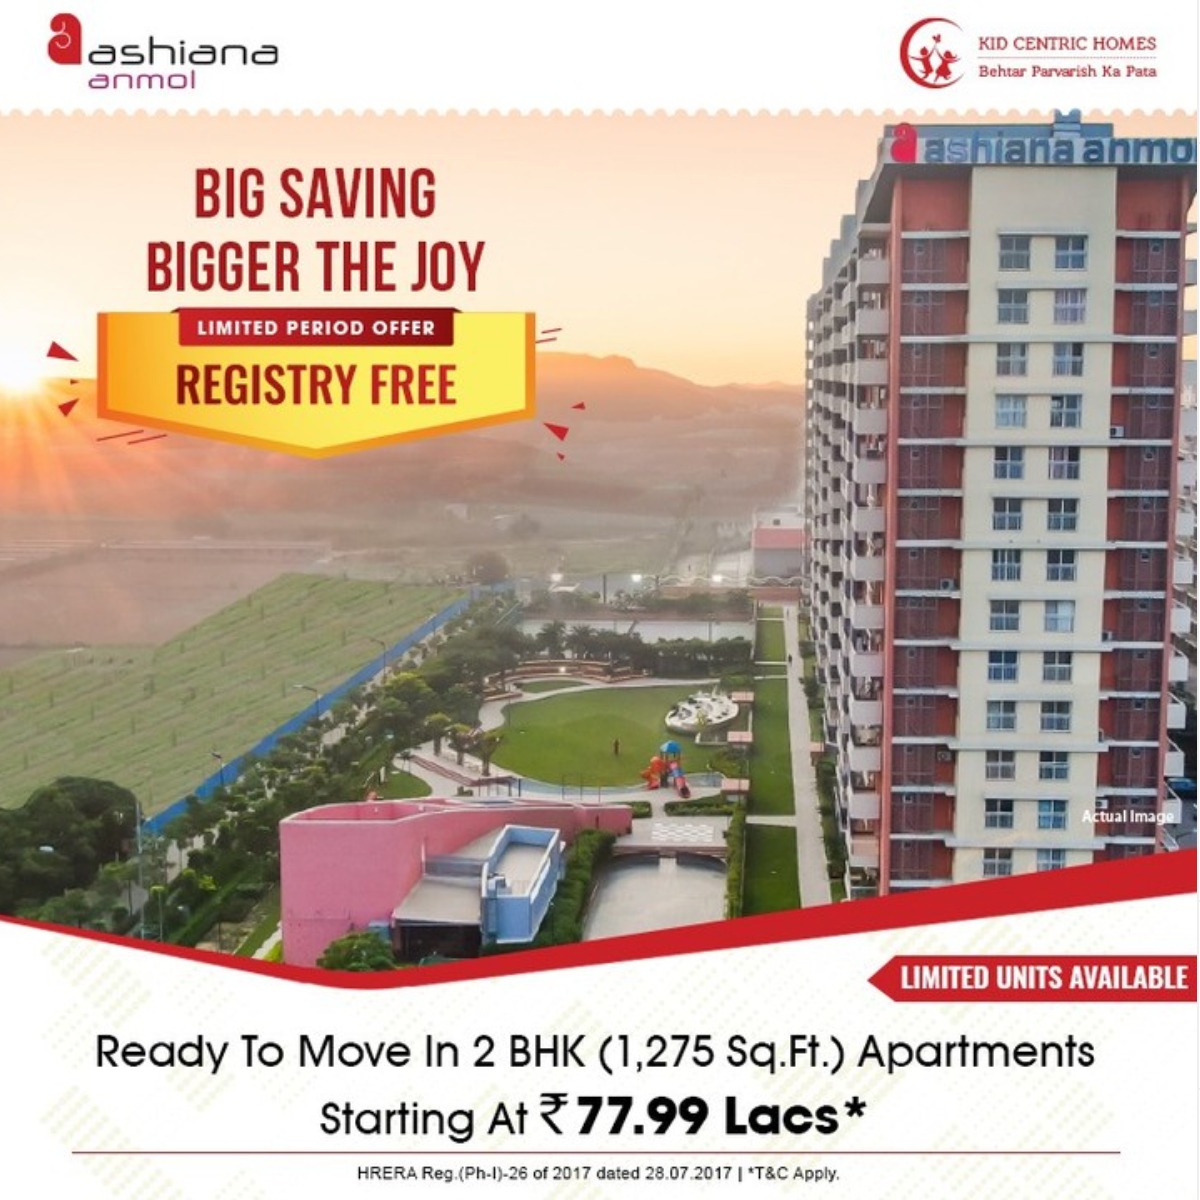 Offering 2 BHK Apartments Starting At Rs 77.99 Lacs At Ashiana Anmol in Sector 33 Sohna Road Gurugram Update